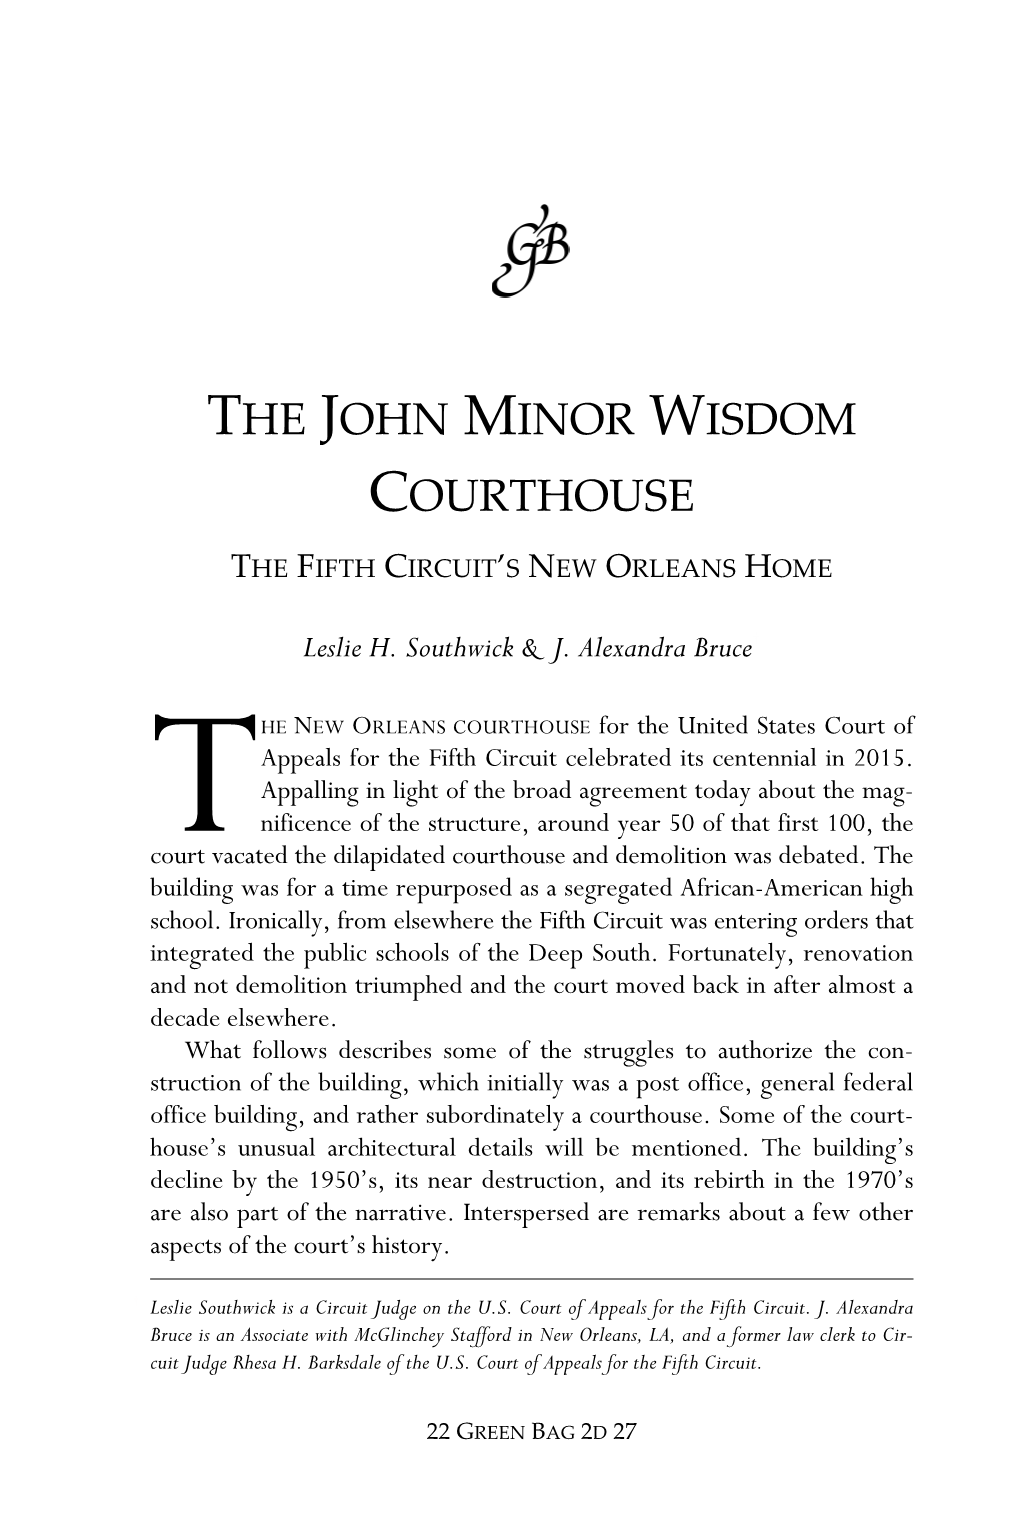 The John Minor Wisdom Courthouse: the Fifth Circuit's New